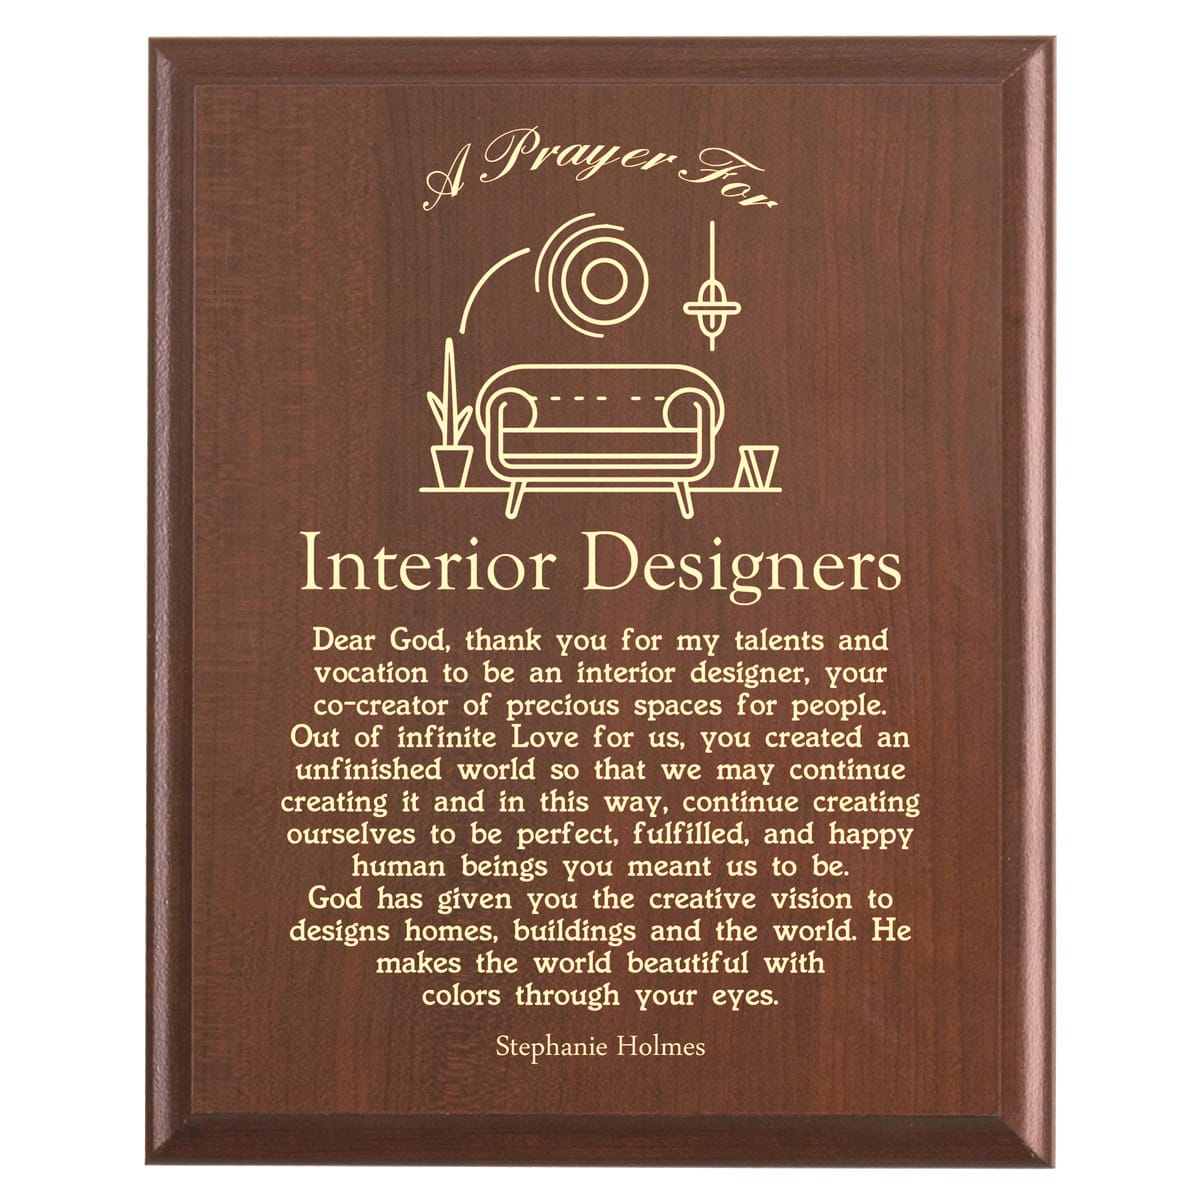 Plaque photo: Interior Designer Prayer Plaque design with free personalization. Wood style finish with customized text.